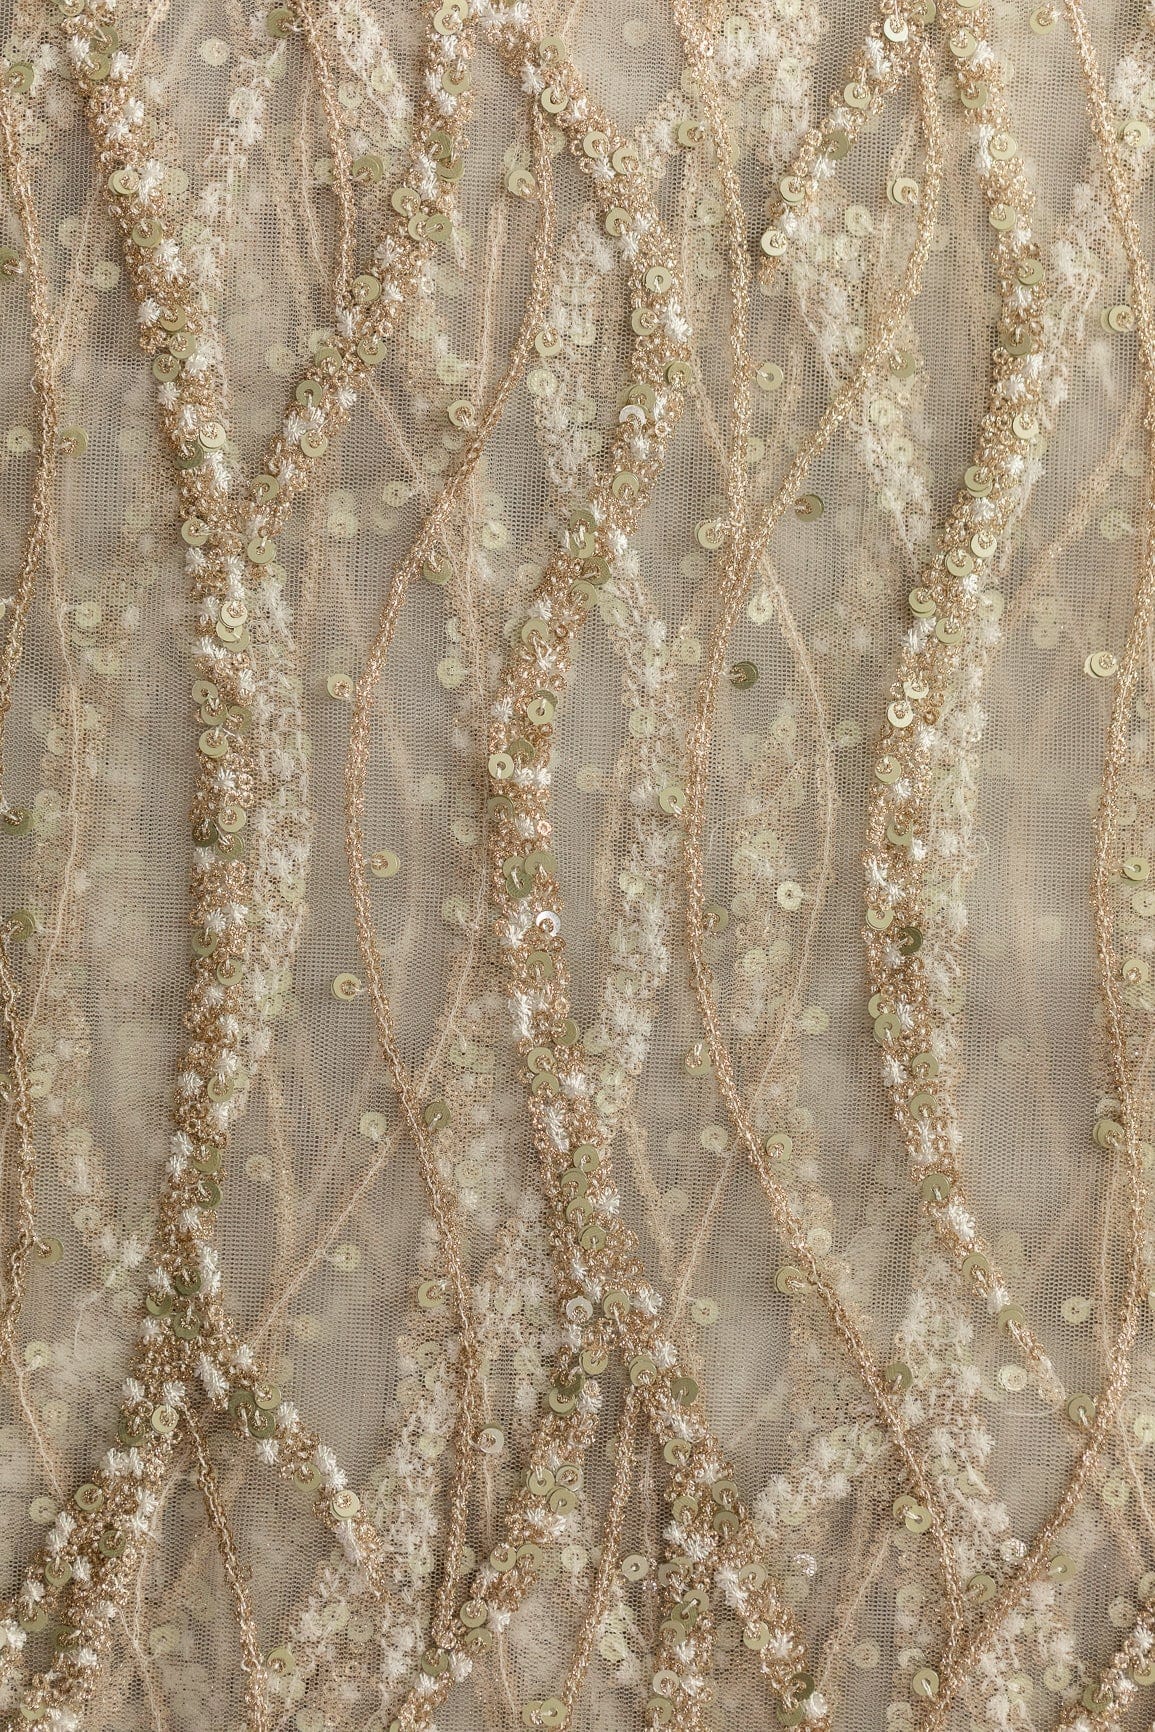 doeraa Embroidery Fabrics Gold Sequins With Beige Thread Embroidery On White Soft Net